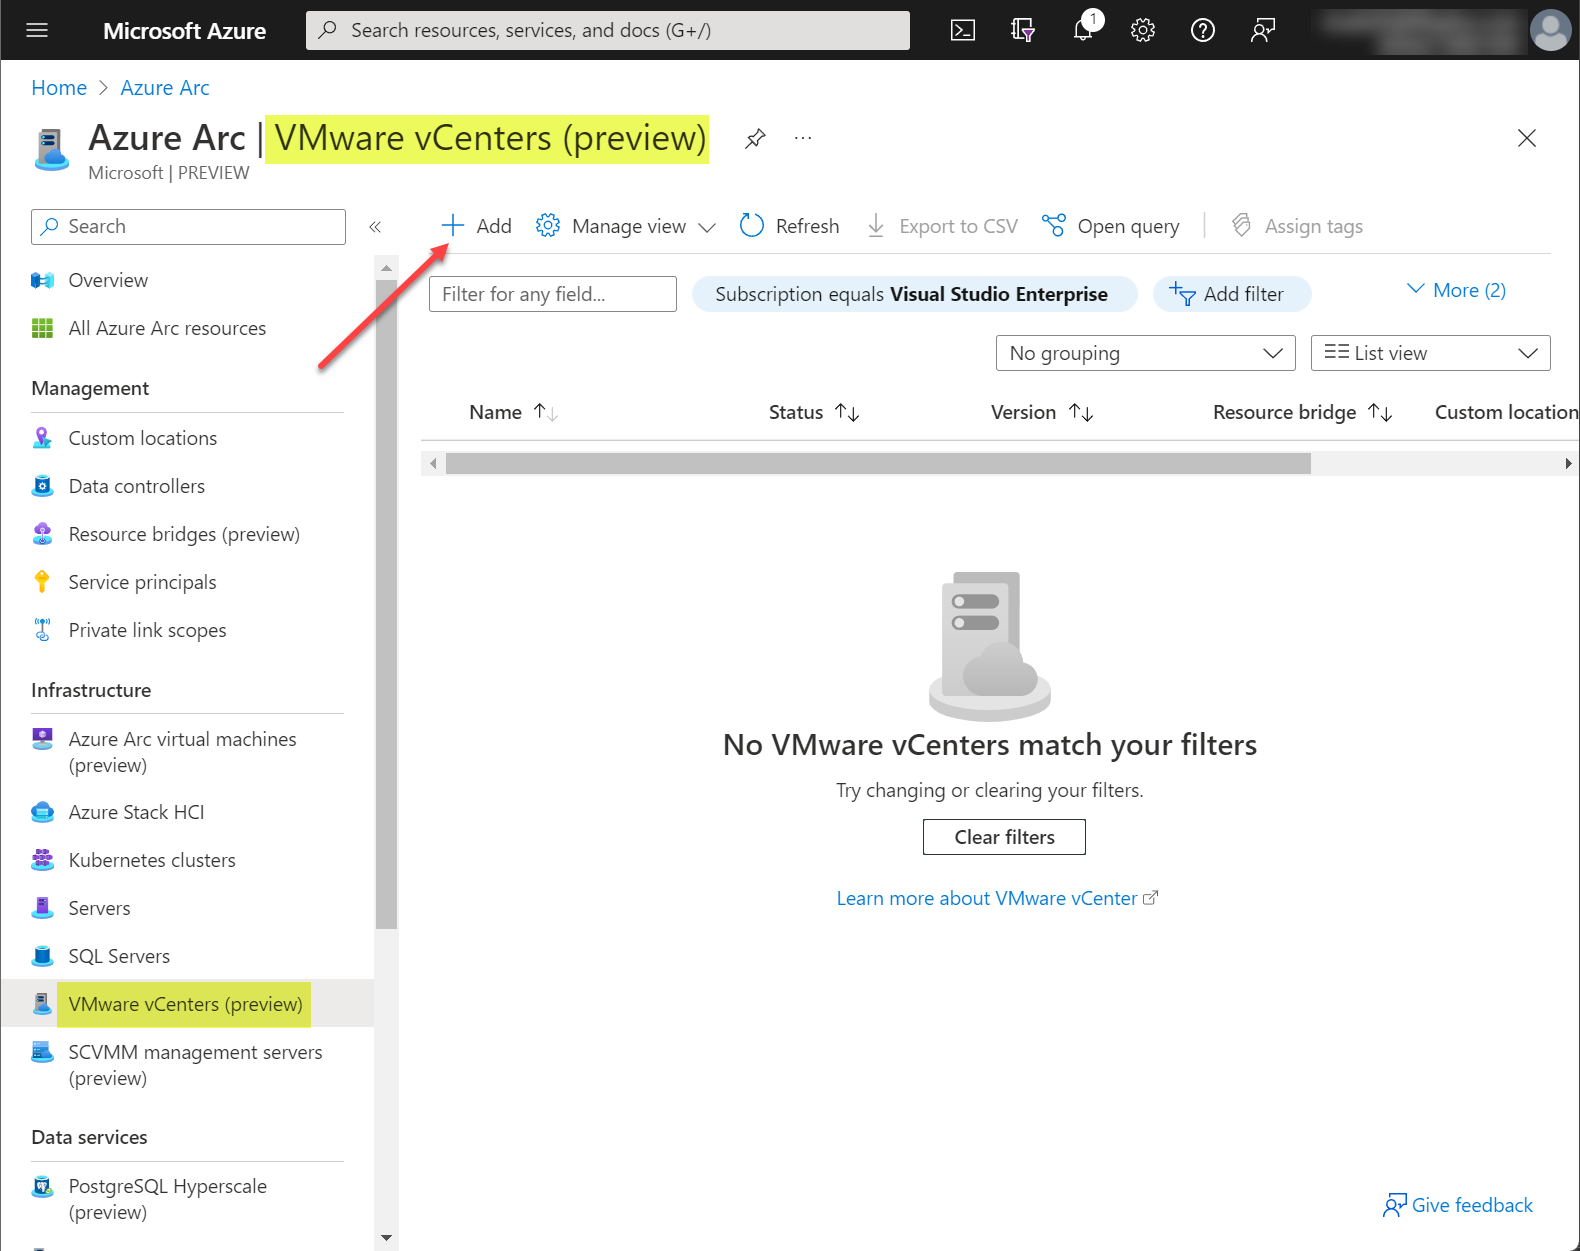 VMware vCenters